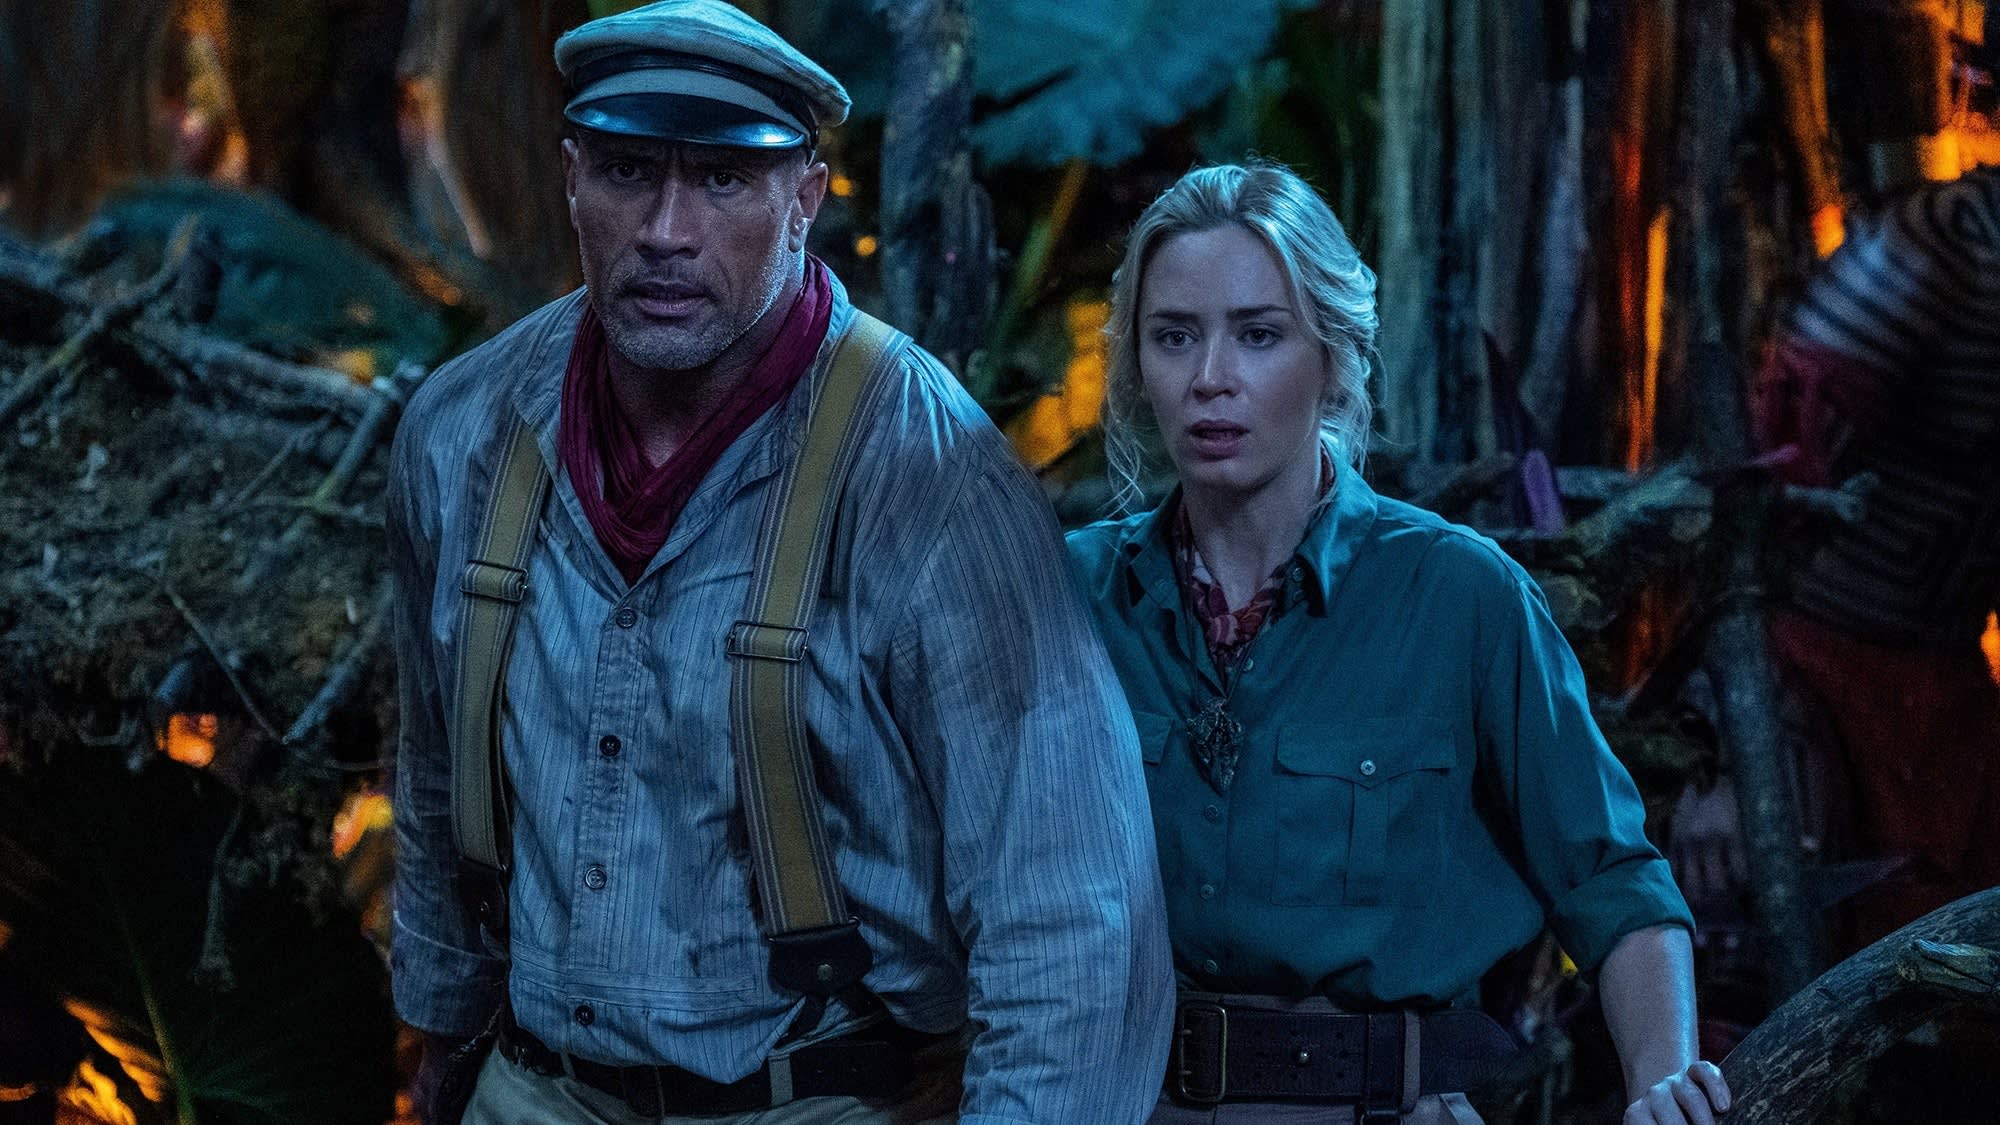 'Jungle Cruise' tallies $34.2 million in domestic debut, adds $30 million from Disney+